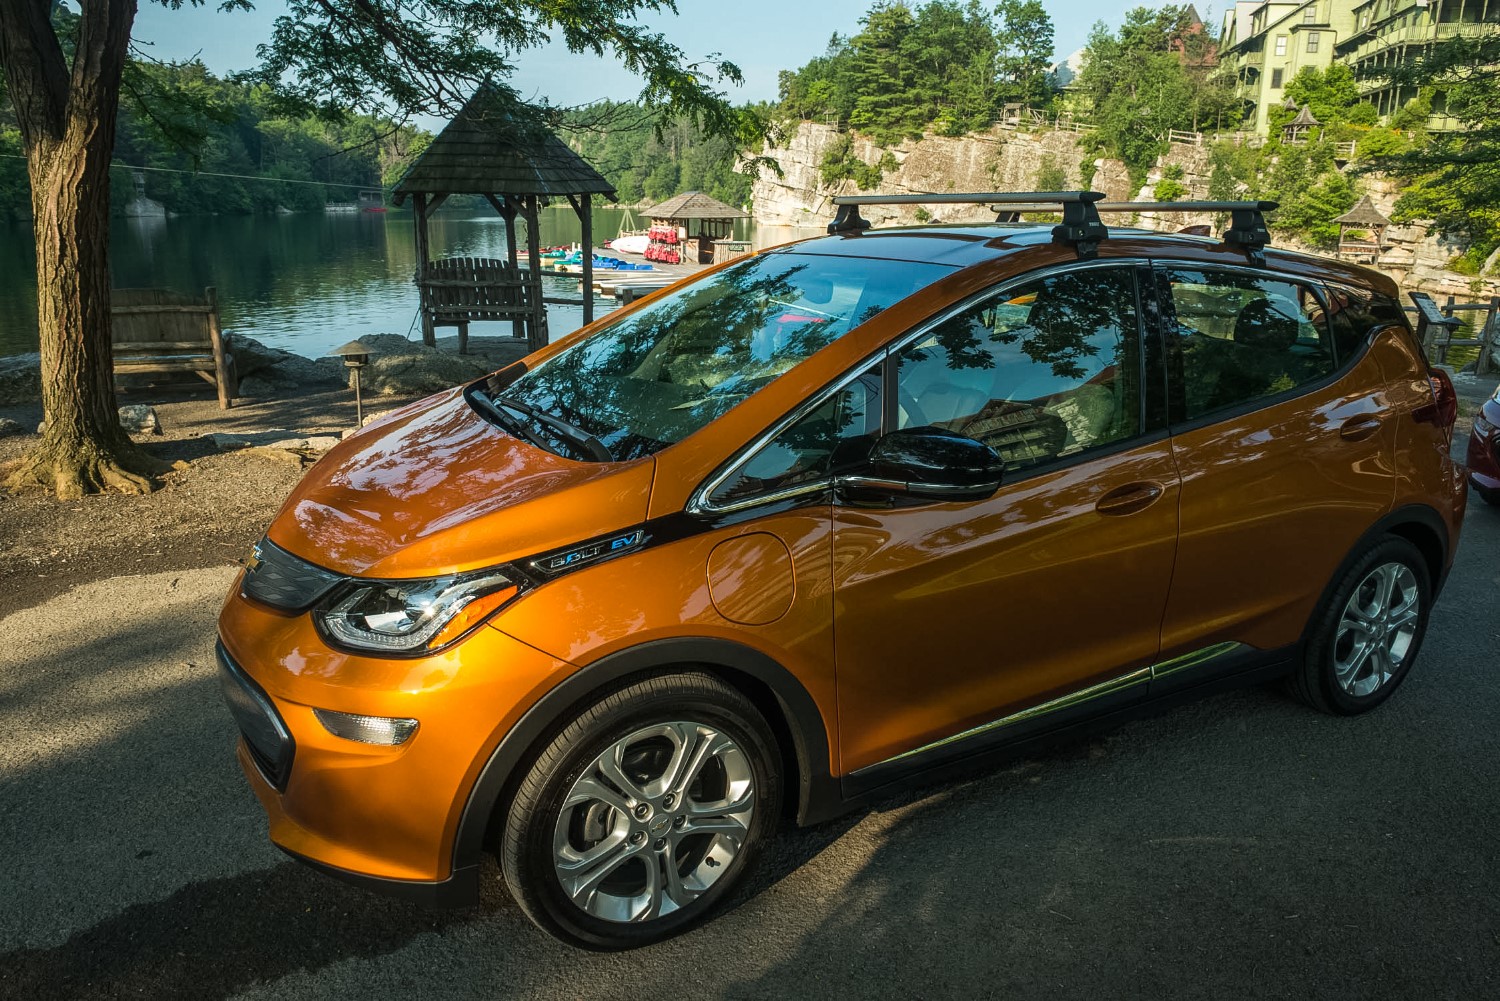 Two more EVs coming based on Chevy Bolt